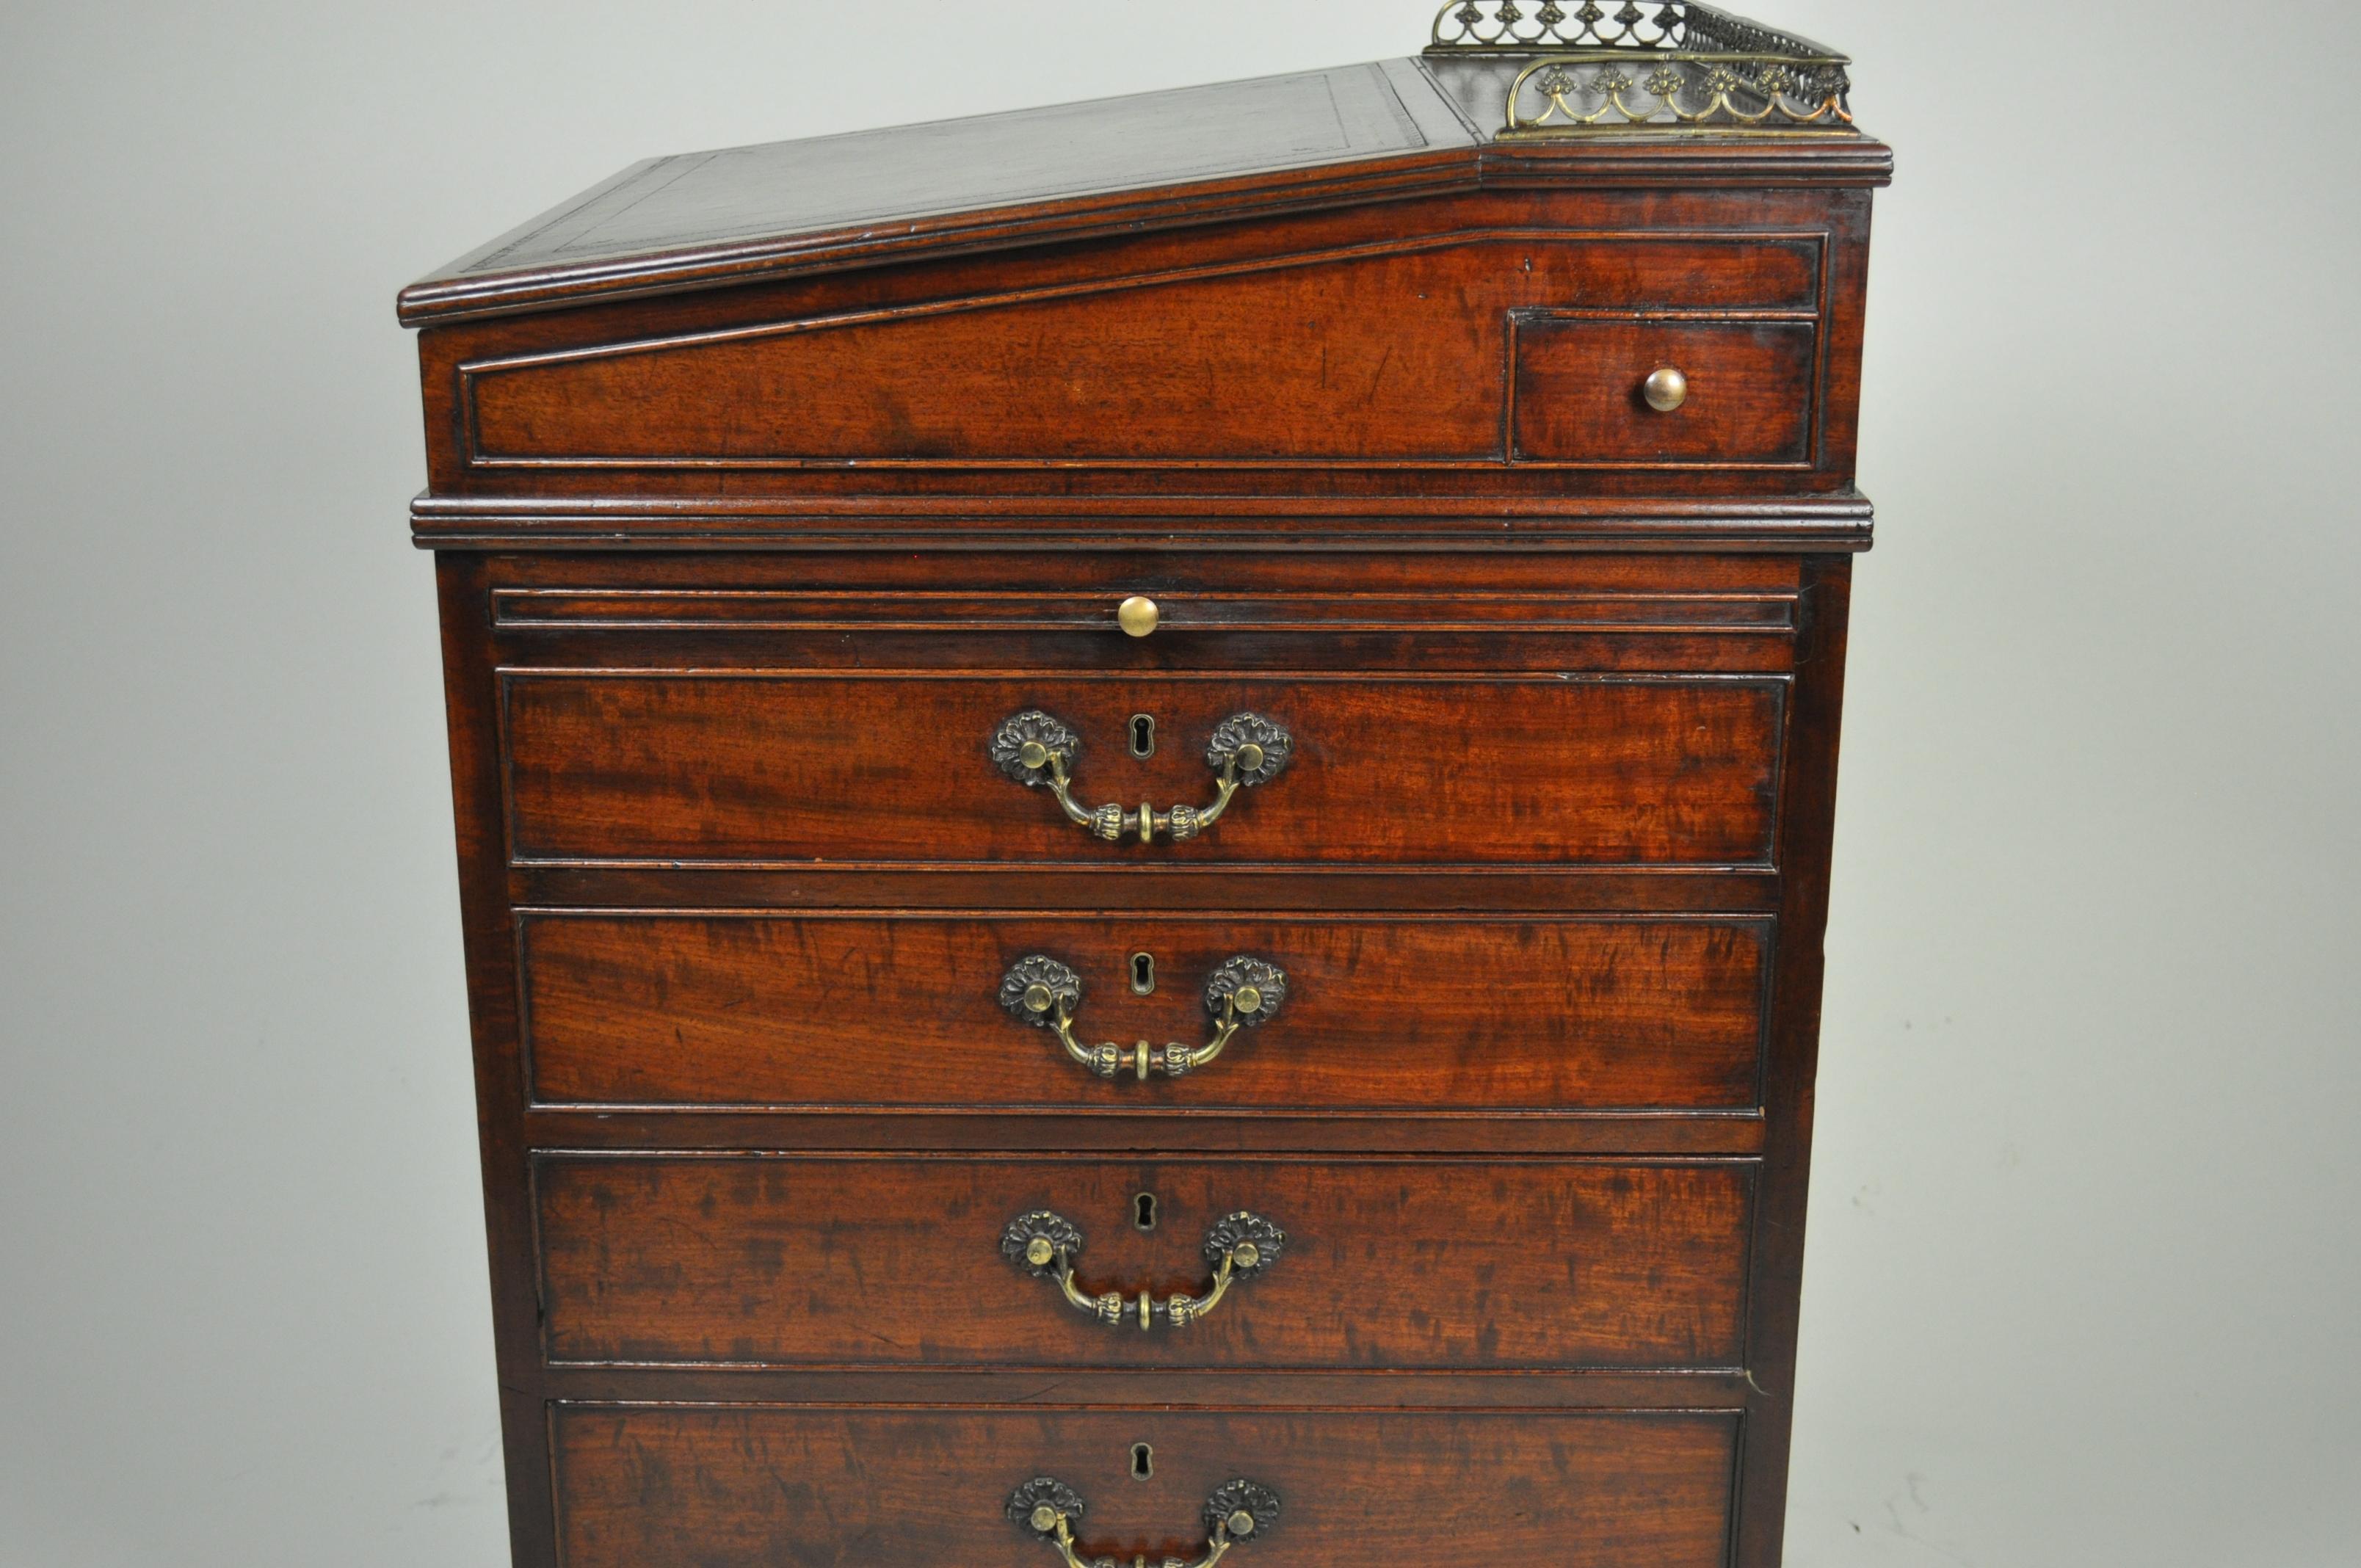 Attributed to Gillows
A superior quality late 18th/early 19th century mahogany Davenport Desk The leather-lined top with brass gallery, lifting to reveal a satinwood faced interior with small drawers. Below are pull-out slides on either side and